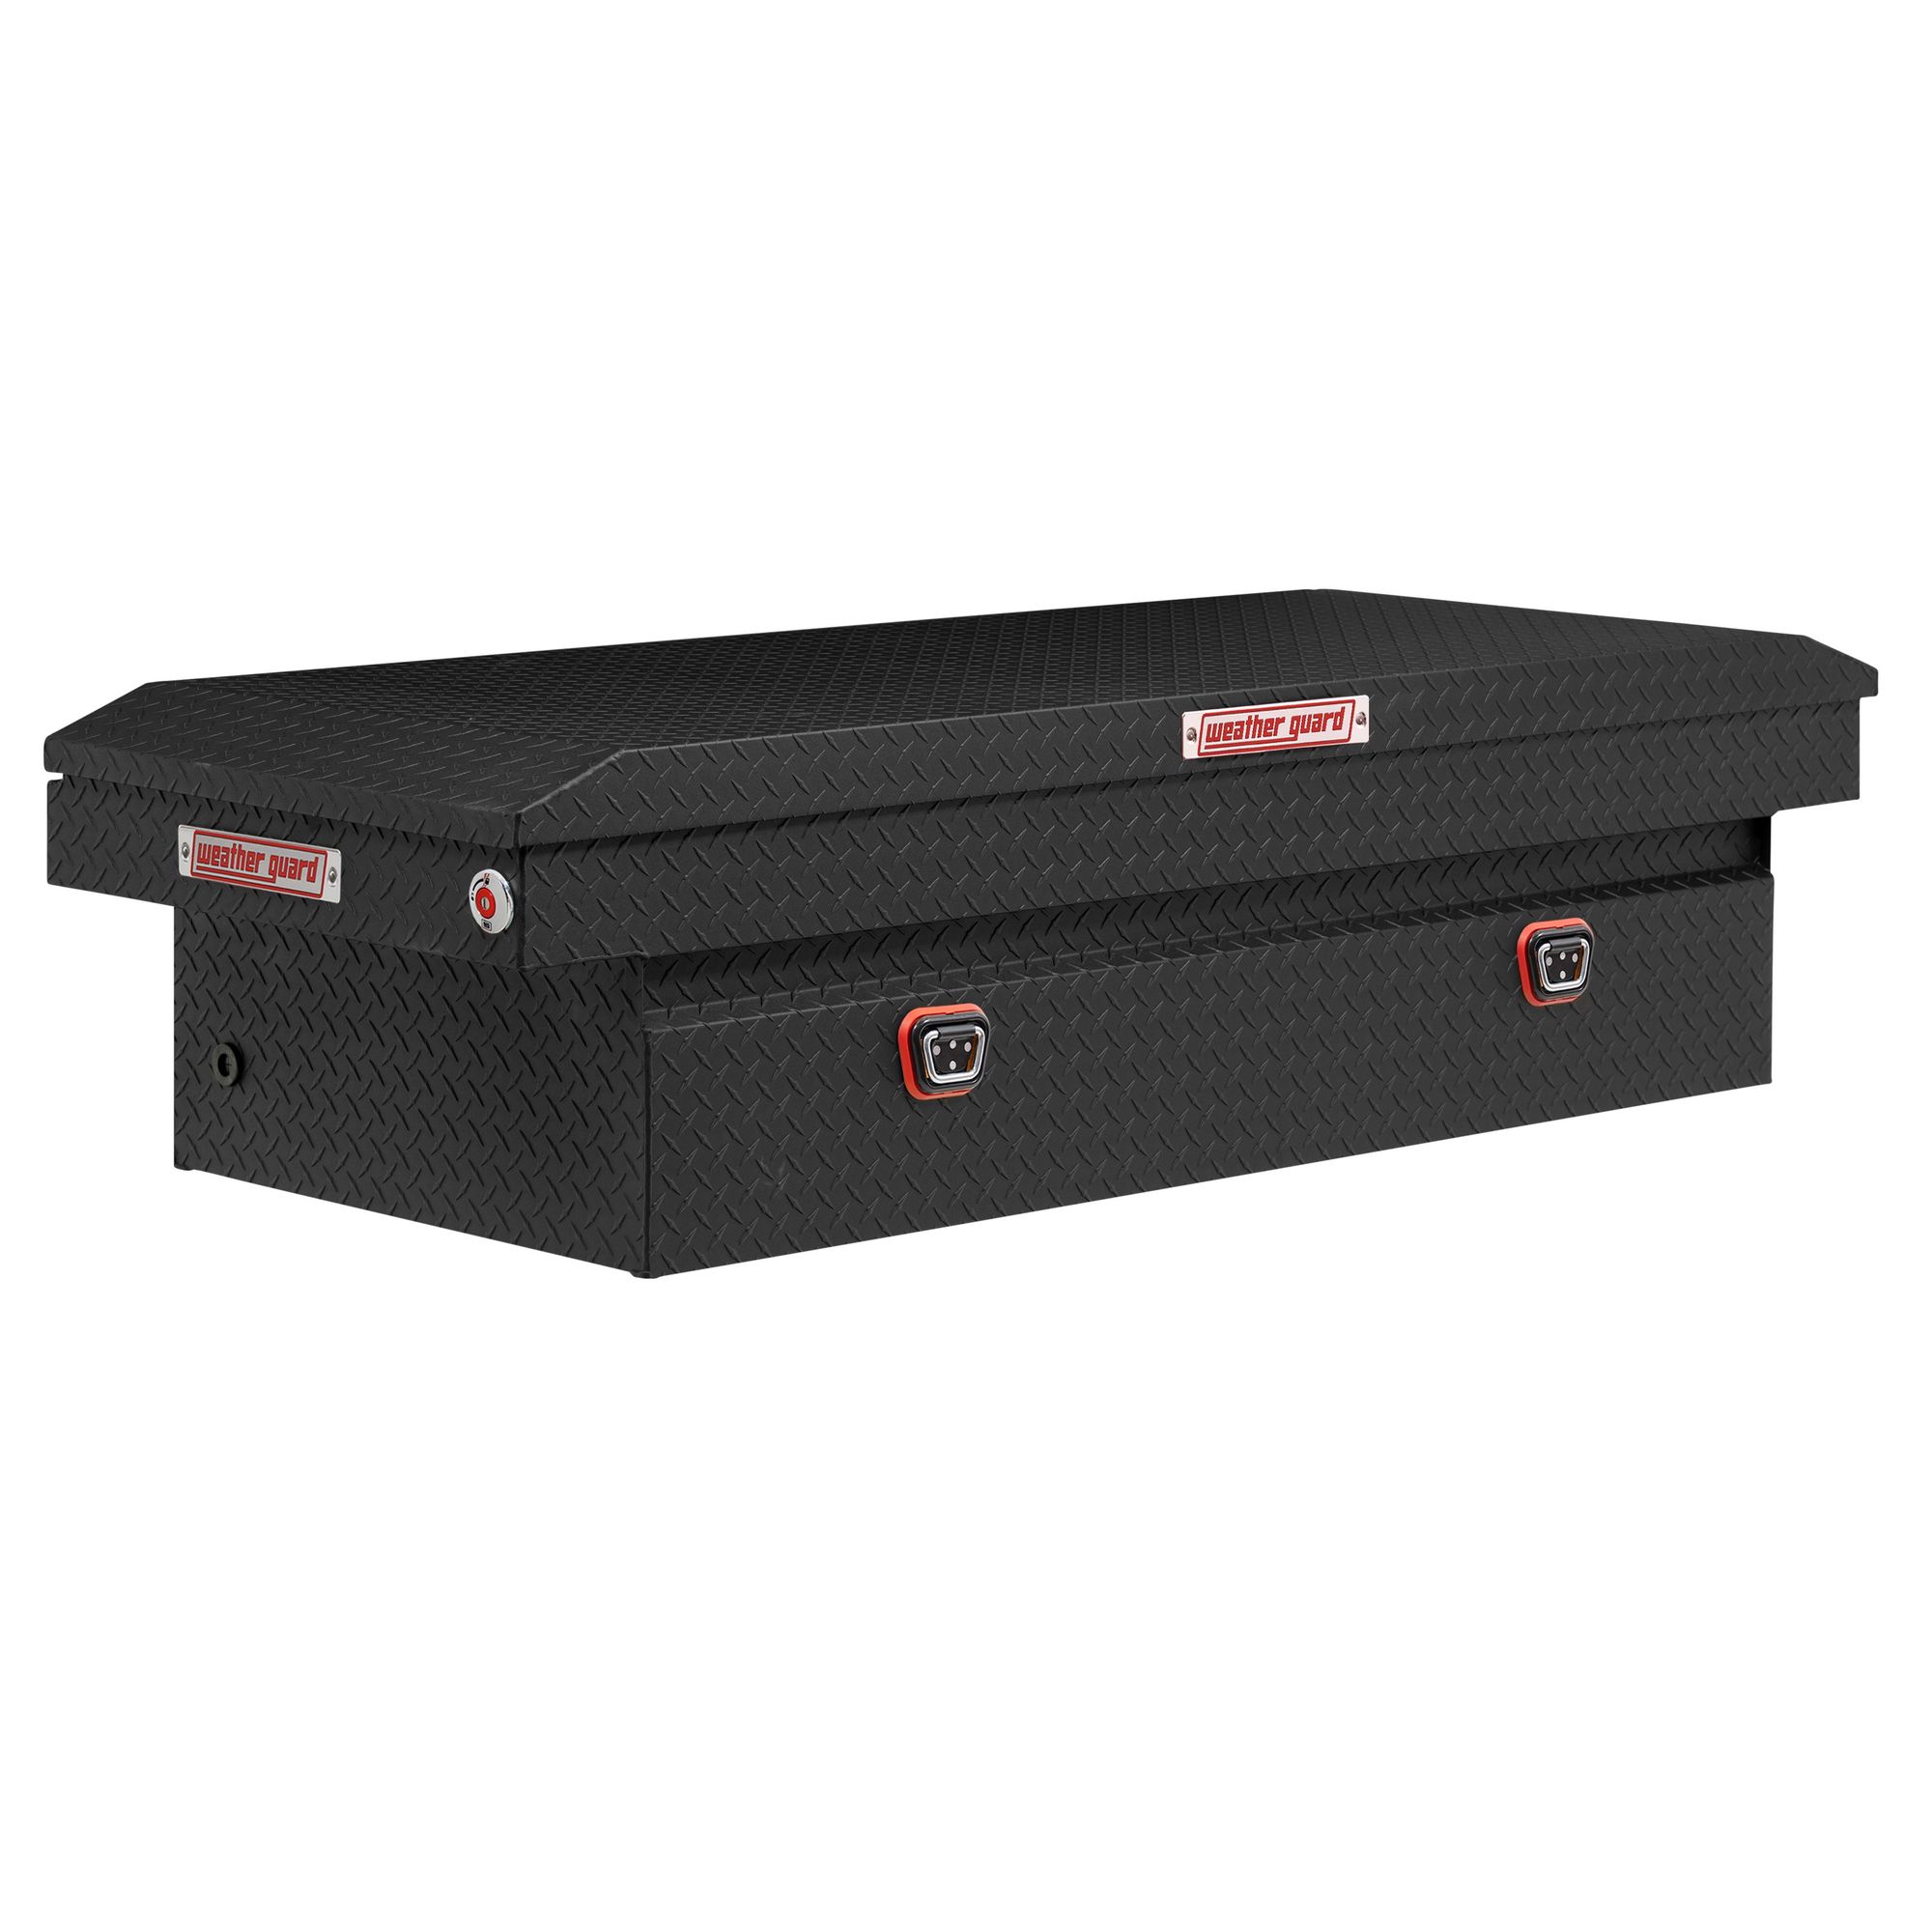 71Inch L Saddle Box, Full Extra Wide, Width 72 in, Material Aluminum, Color Finish Textured Matte Black, Model - Weather Guard 117-52-04